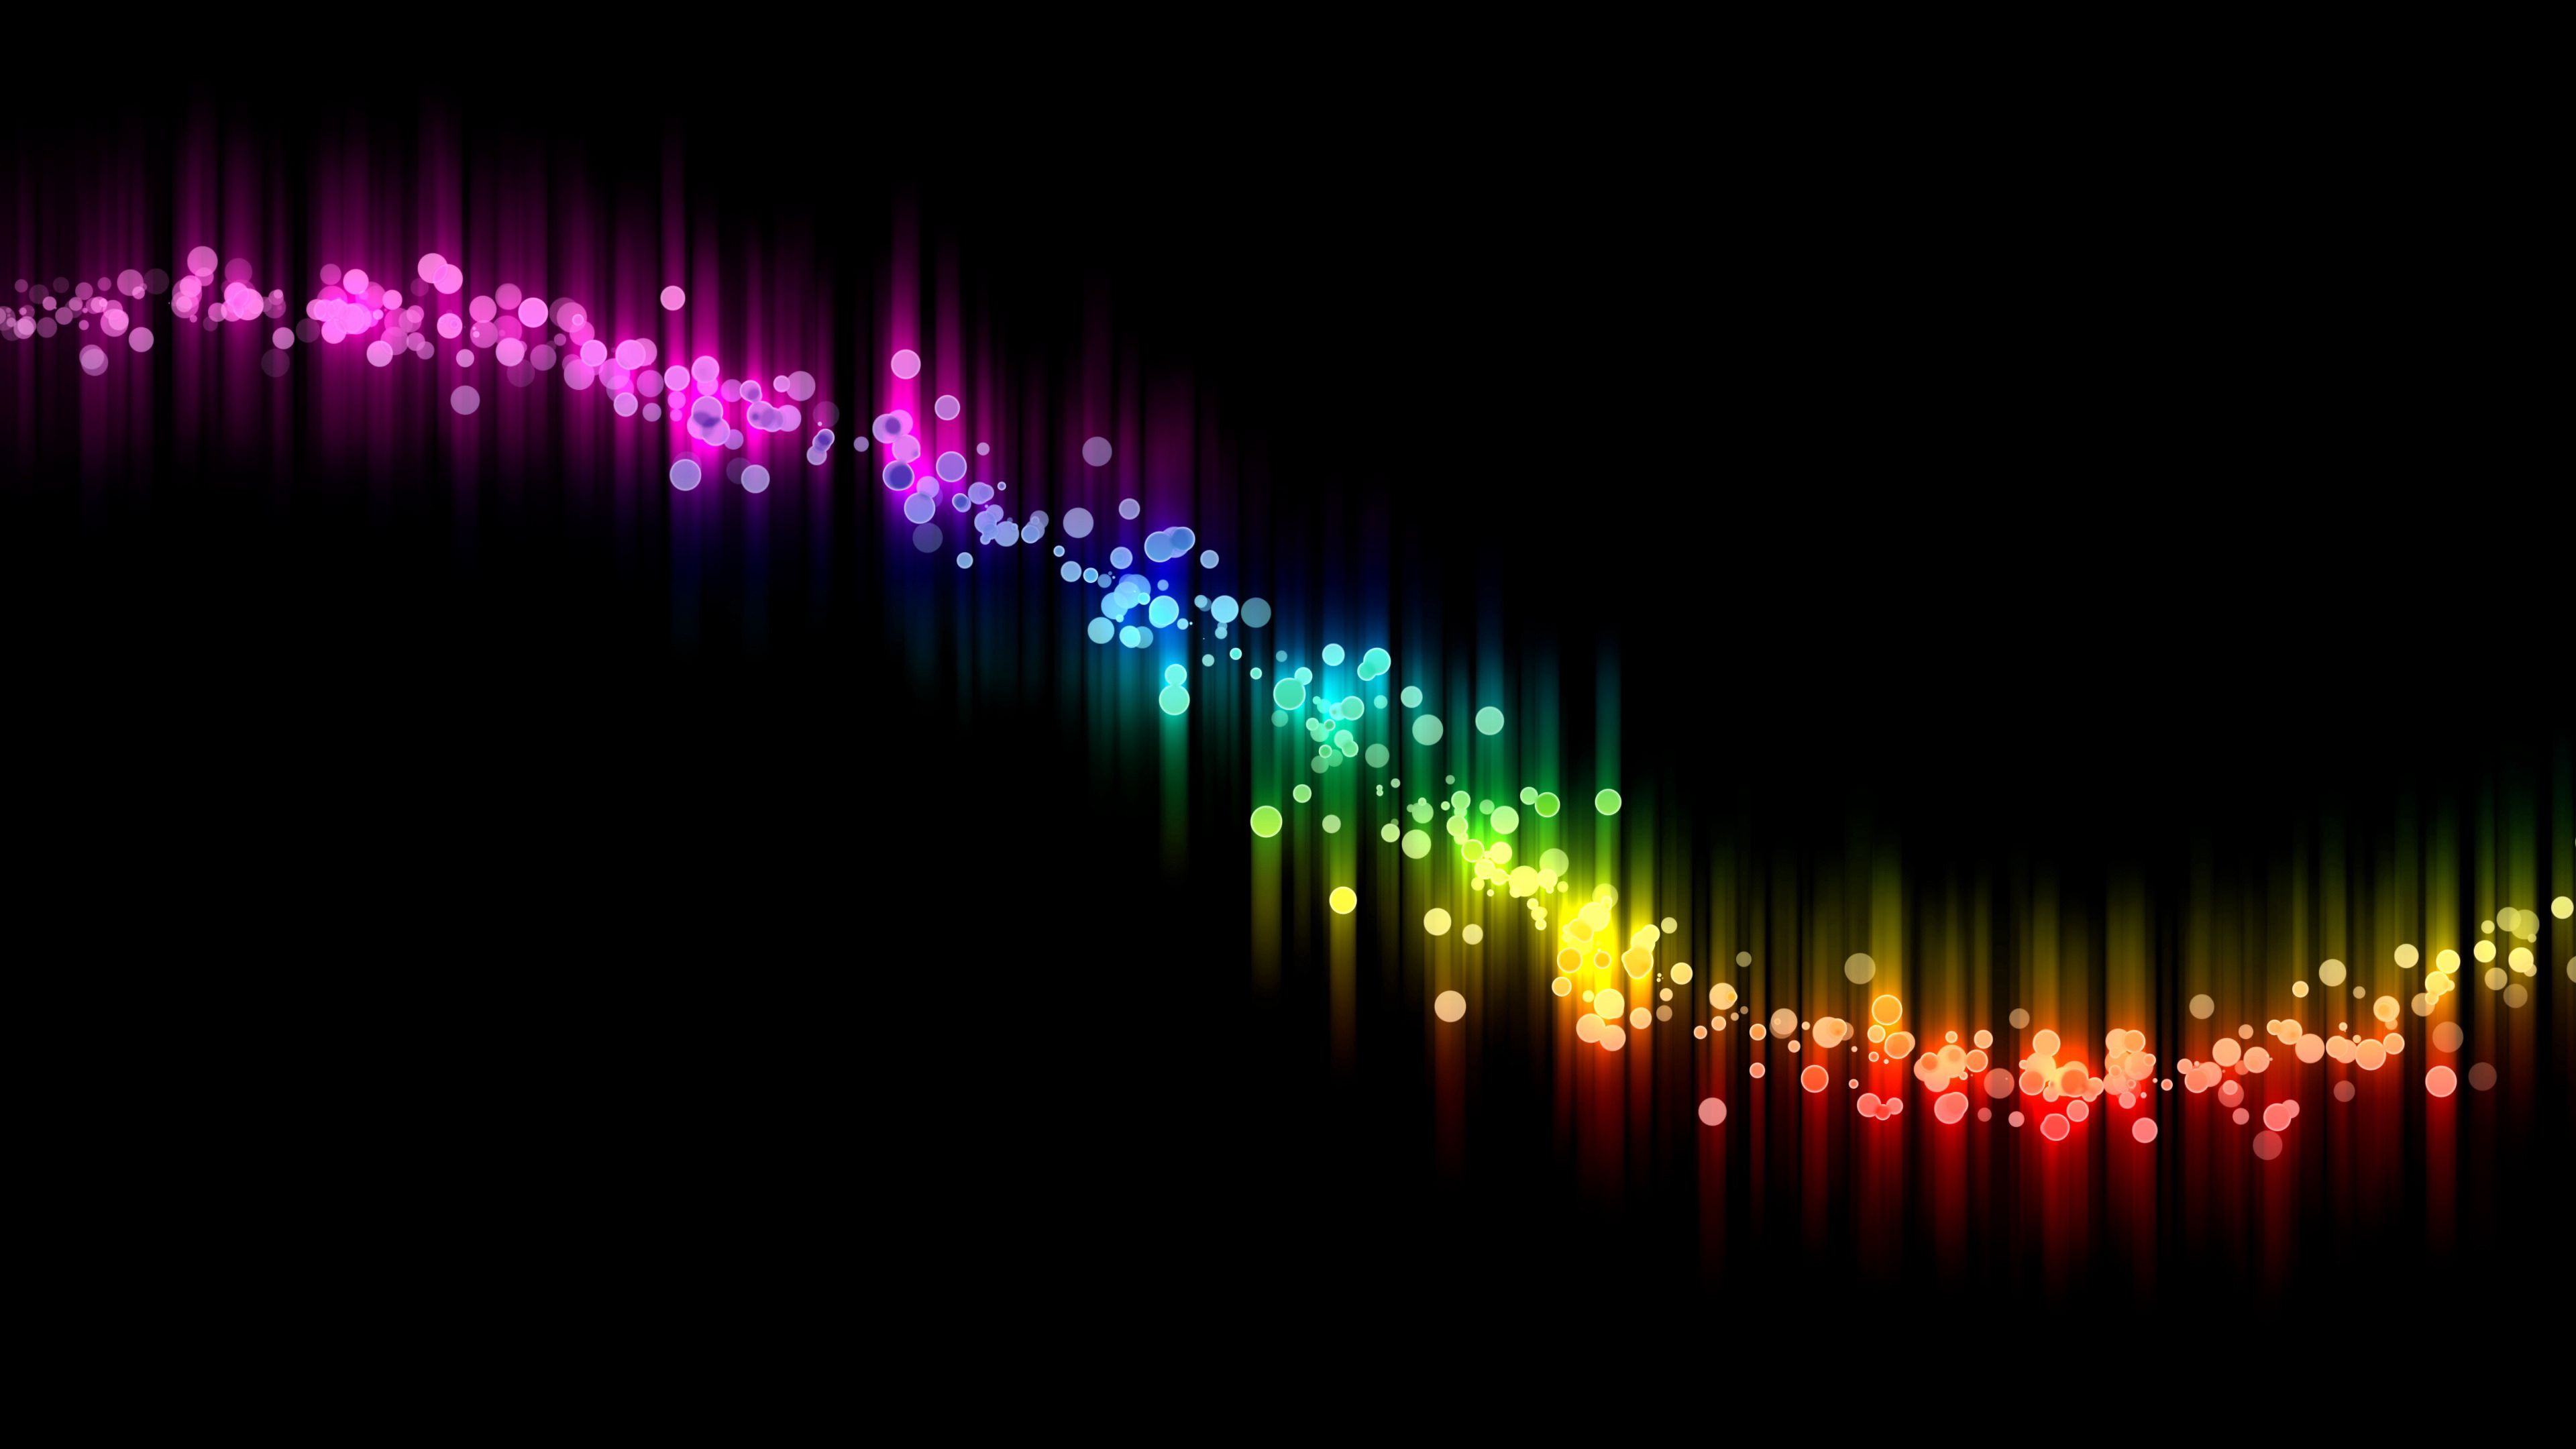 Download wallpaper 3840x2160 abstract, black, colorful, curve 4k uhd 16:9 hd  background